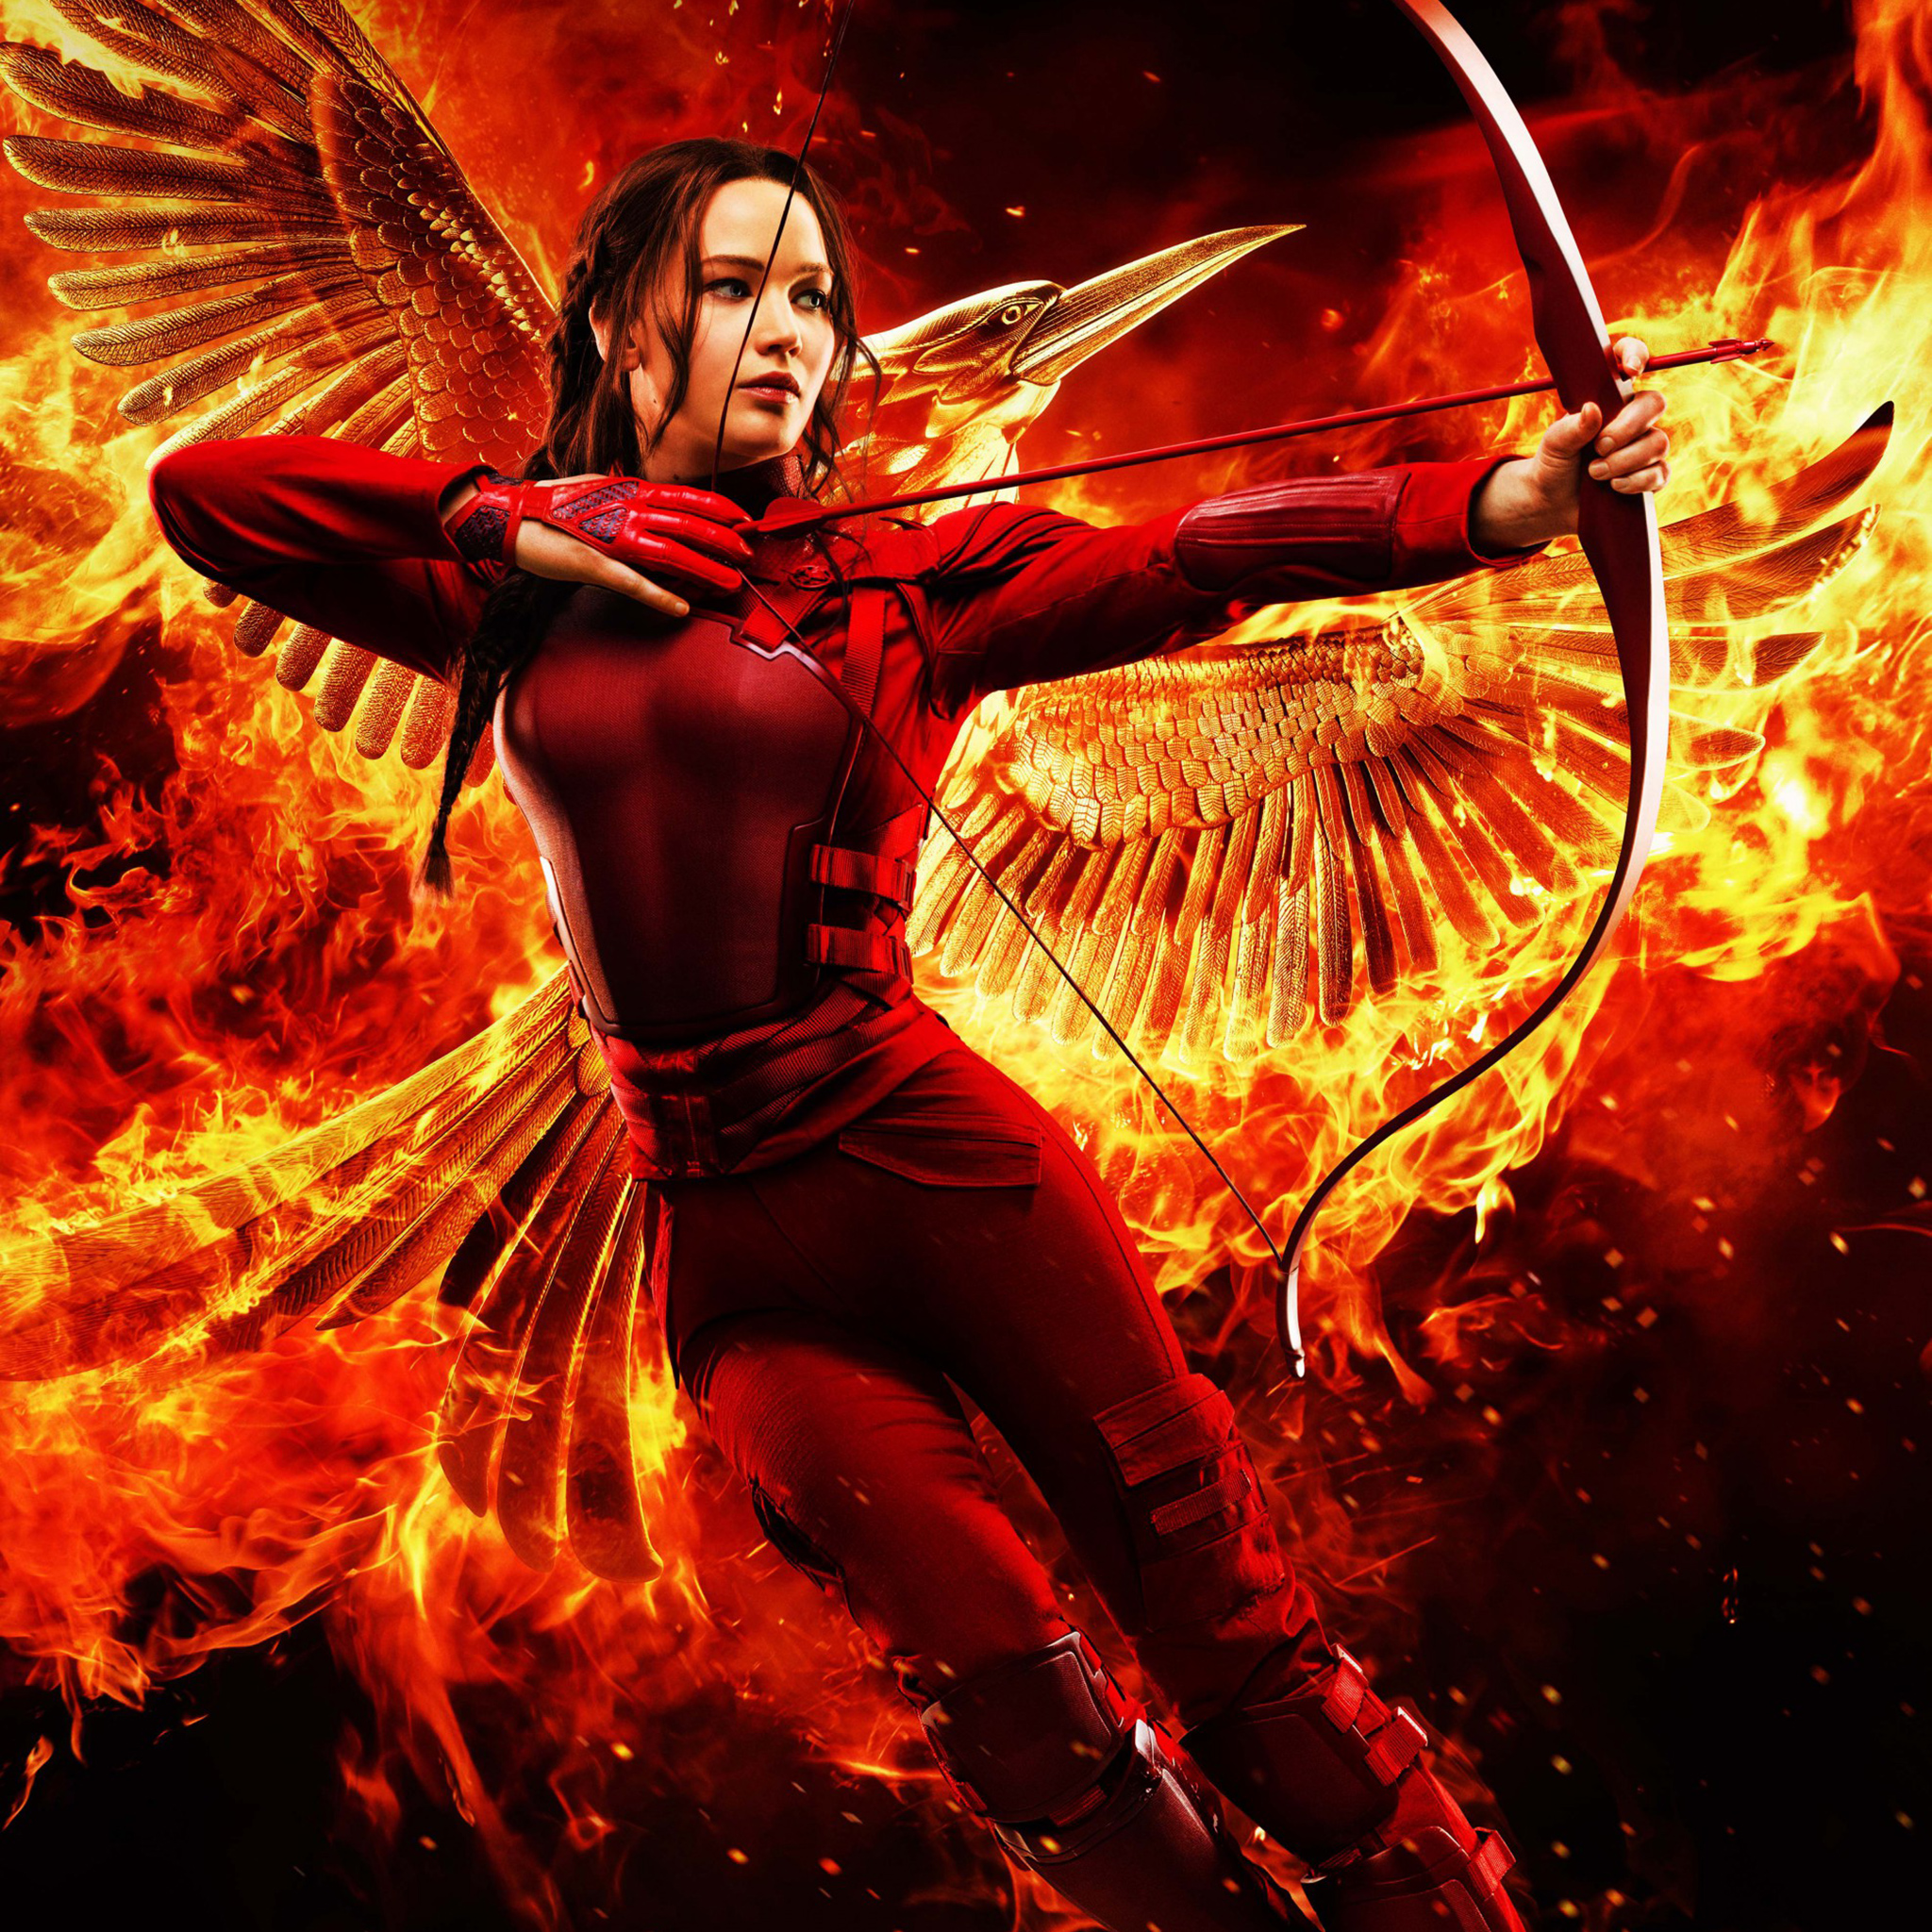 iPad Wallpaper Pack Of Wod November The Hunger Games